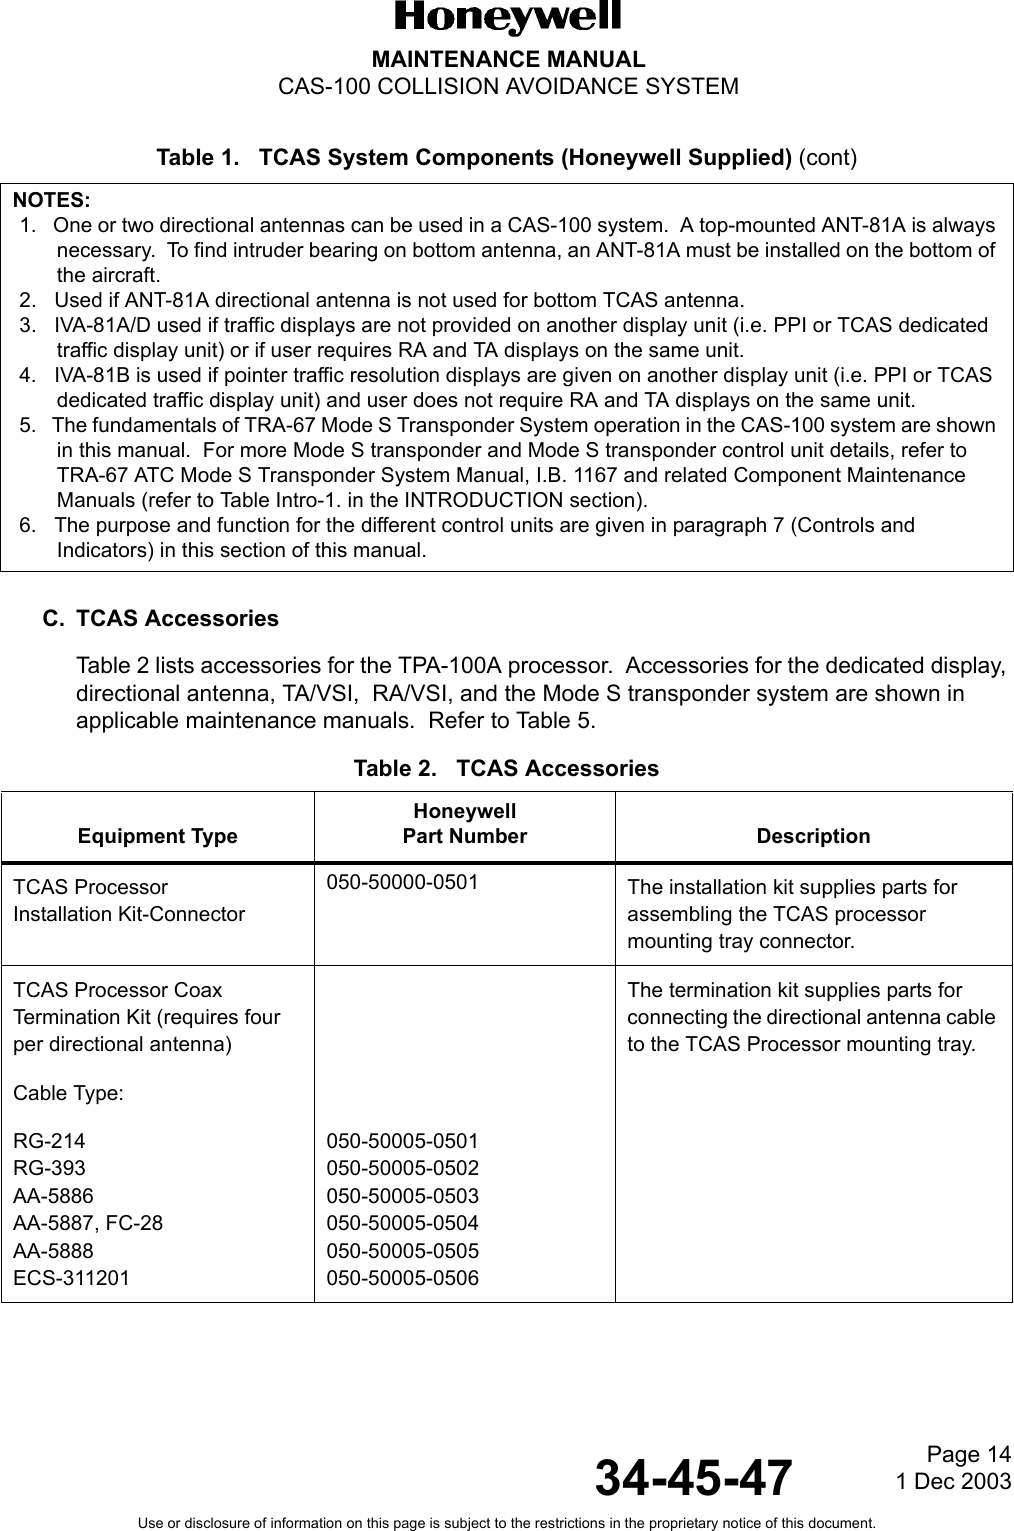 Page 141 Dec 200334-45-47MAINTENANCE MANUALCAS-100 COLLISION AVOIDANCE SYSTEMUse or disclosure of information on this page is subject to the restrictions in the proprietary notice of this document.Table 1.   TCAS System Components (Honeywell Supplied) (cont)C. TCAS AccessoriesTable 2 lists accessories for the TPA-100A processor.  Accessories for the dedicated display, directional antenna, TA/VSI,  RA/VSI, and the Mode S transponder system are shown in applicable maintenance manuals.  Refer to Table 5. Table 2.   TCAS AccessoriesNOTES:1.   One or two directional antennas can be used in a CAS-100 system.  A top-mounted ANT-81A is always necessary.  To find intruder bearing on bottom antenna, an ANT-81A must be installed on the bottom of the aircraft.2.   Used if ANT-81A directional antenna is not used for bottom TCAS antenna.3.   IVA-81A/D used if traffic displays are not provided on another display unit (i.e. PPI or TCAS dedicated traffic display unit) or if user requires RA and TA displays on the same unit.4.   IVA-81B is used if pointer traffic resolution displays are given on another display unit (i.e. PPI or TCAS dedicated traffic display unit) and user does not require RA and TA displays on the same unit.5.   The fundamentals of TRA-67 Mode S Transponder System operation in the CAS-100 system are shown in this manual.  For more Mode S transponder and Mode S transponder control unit details, refer to TRA-67 ATC Mode S Transponder System Manual, I.B. 1167 and related Component Maintenance Manuals (refer to Table Intro-1. in the INTRODUCTION section).6.   The purpose and function for the different control units are given in paragraph 7 (Controls and Indicators) in this section of this manual.Equipment TypeHoneywellPart Number DescriptionTCAS ProcessorInstallation Kit-Connector 050-50000-0501 The installation kit supplies parts for assembling the TCAS processor mounting tray connector.TCAS Processor Coax Termination Kit (requires four per directional antenna)The termination kit supplies parts for connecting the directional antenna cable to the TCAS Processor mounting tray.Cable Type:RG-214RG-393AA-5886AA-5887, FC-28AA-5888ECS-311201050-50005-0501050-50005-0502050-50005-0503050-50005-0504050-50005-0505050-50005-0506